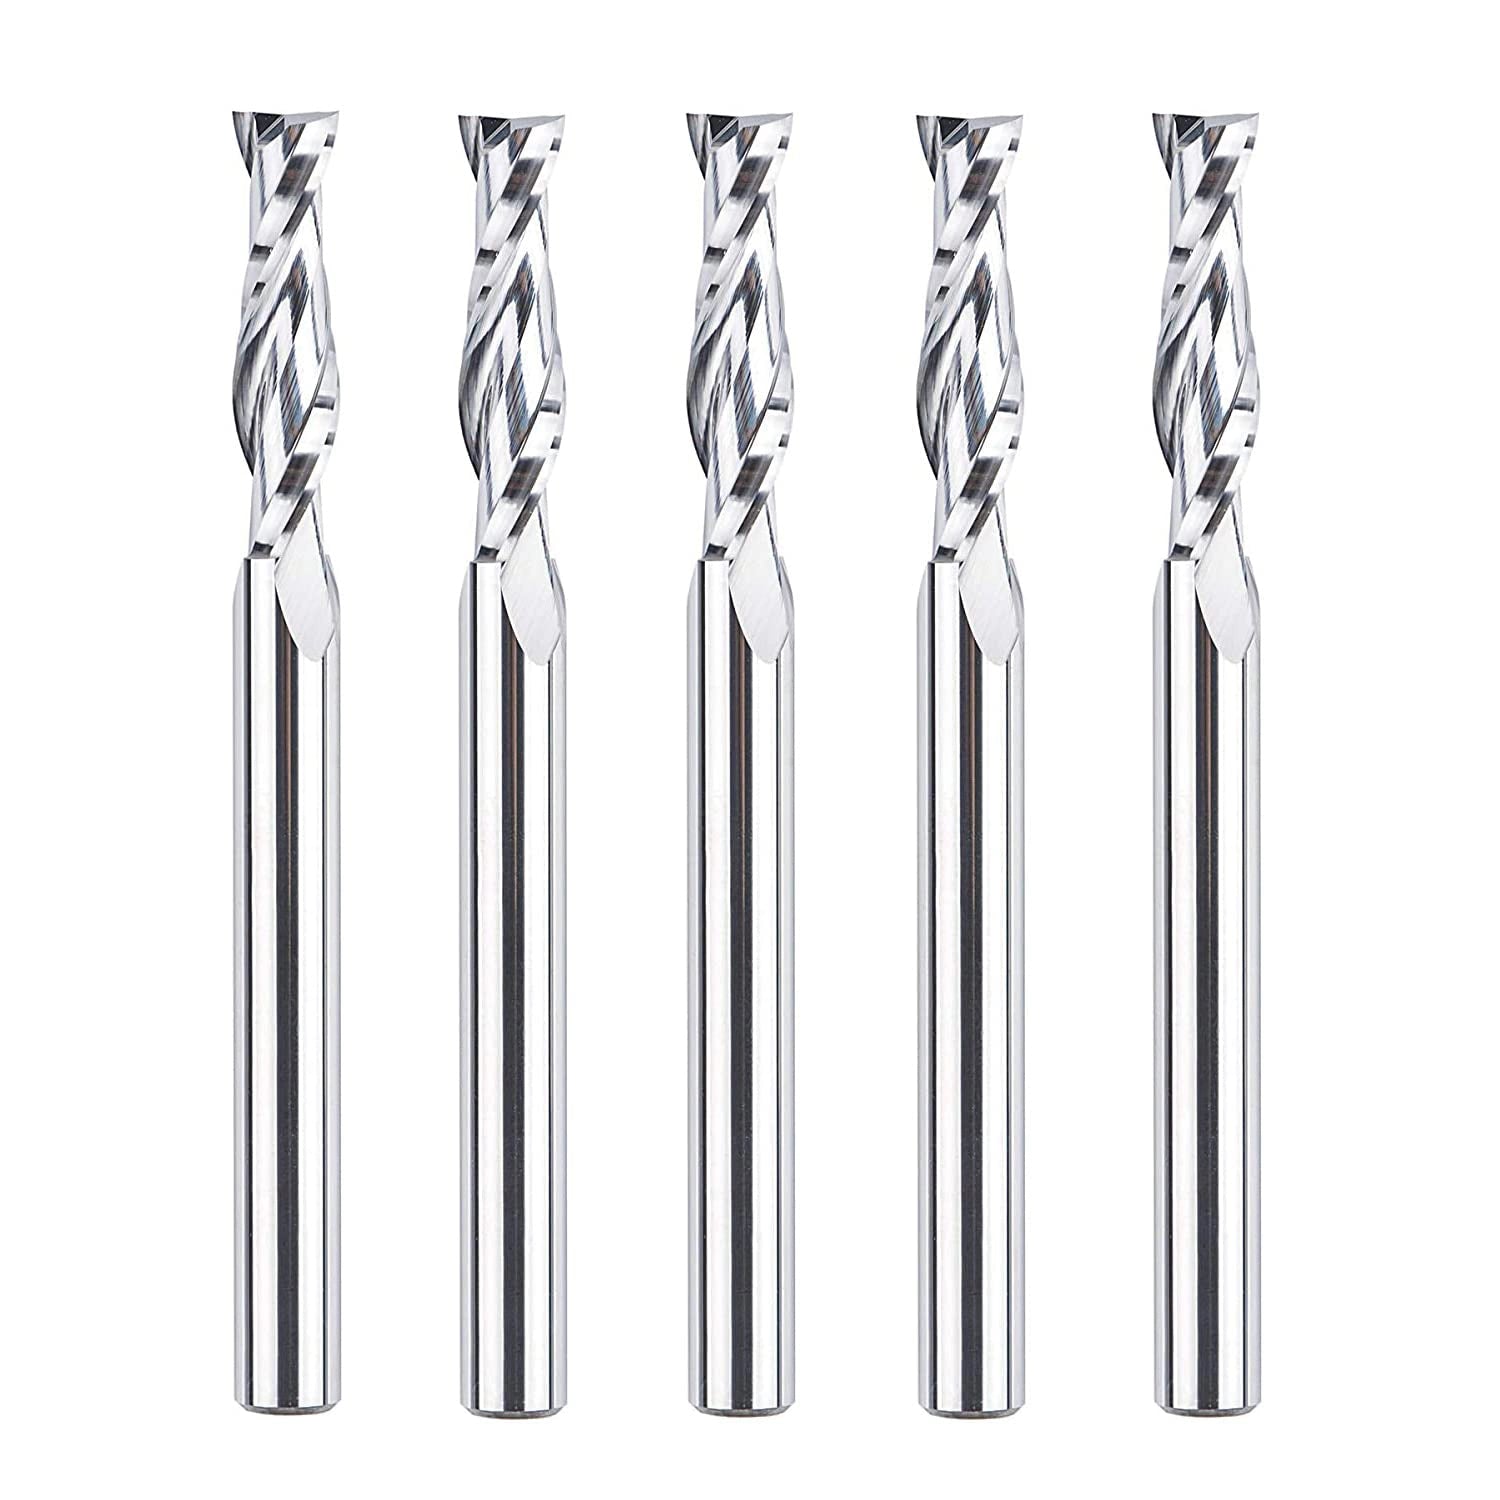 SpeTool W04016 SC Spiral Plunge 1/4" Dia x 1/4" Shank x 1" Cutting Length 3" Extra Long 2 Flute Up-Cut Router Bit-6